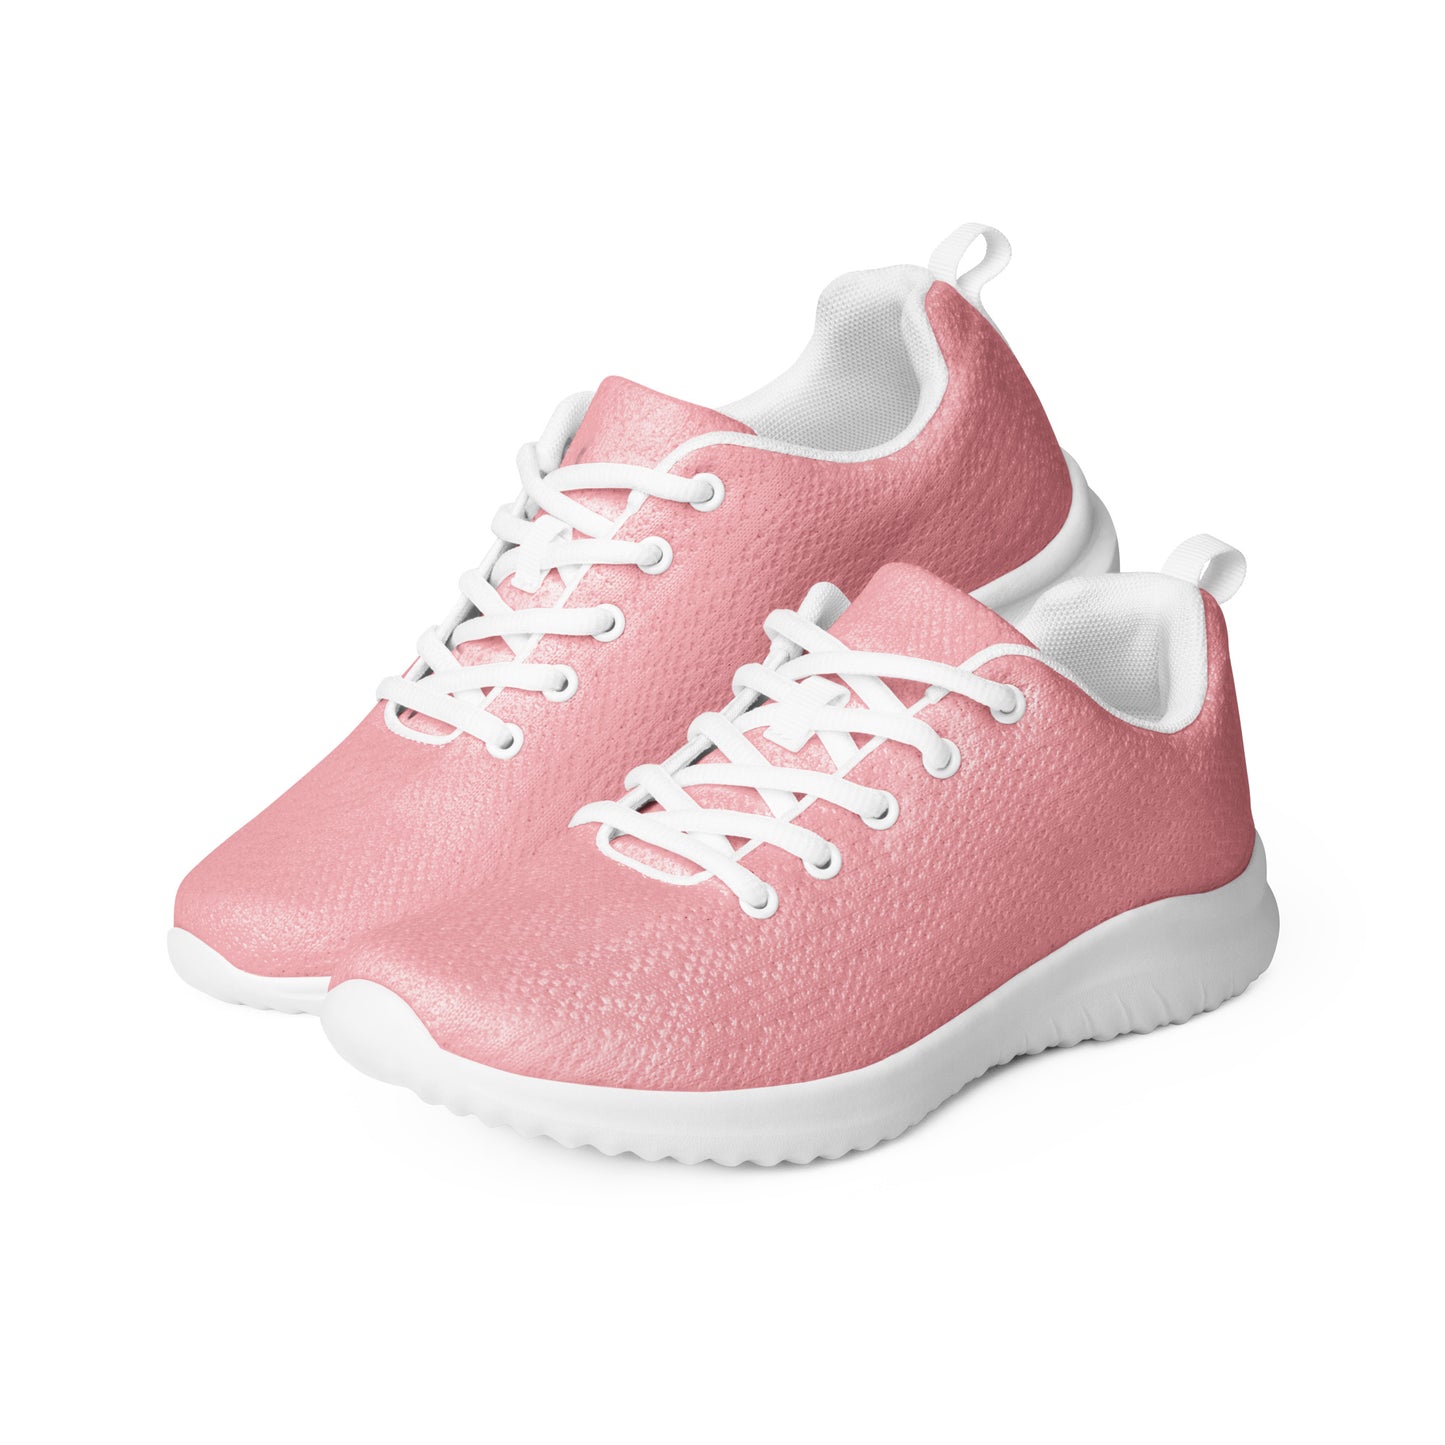 Women’s Light Pink Athletic Shoes